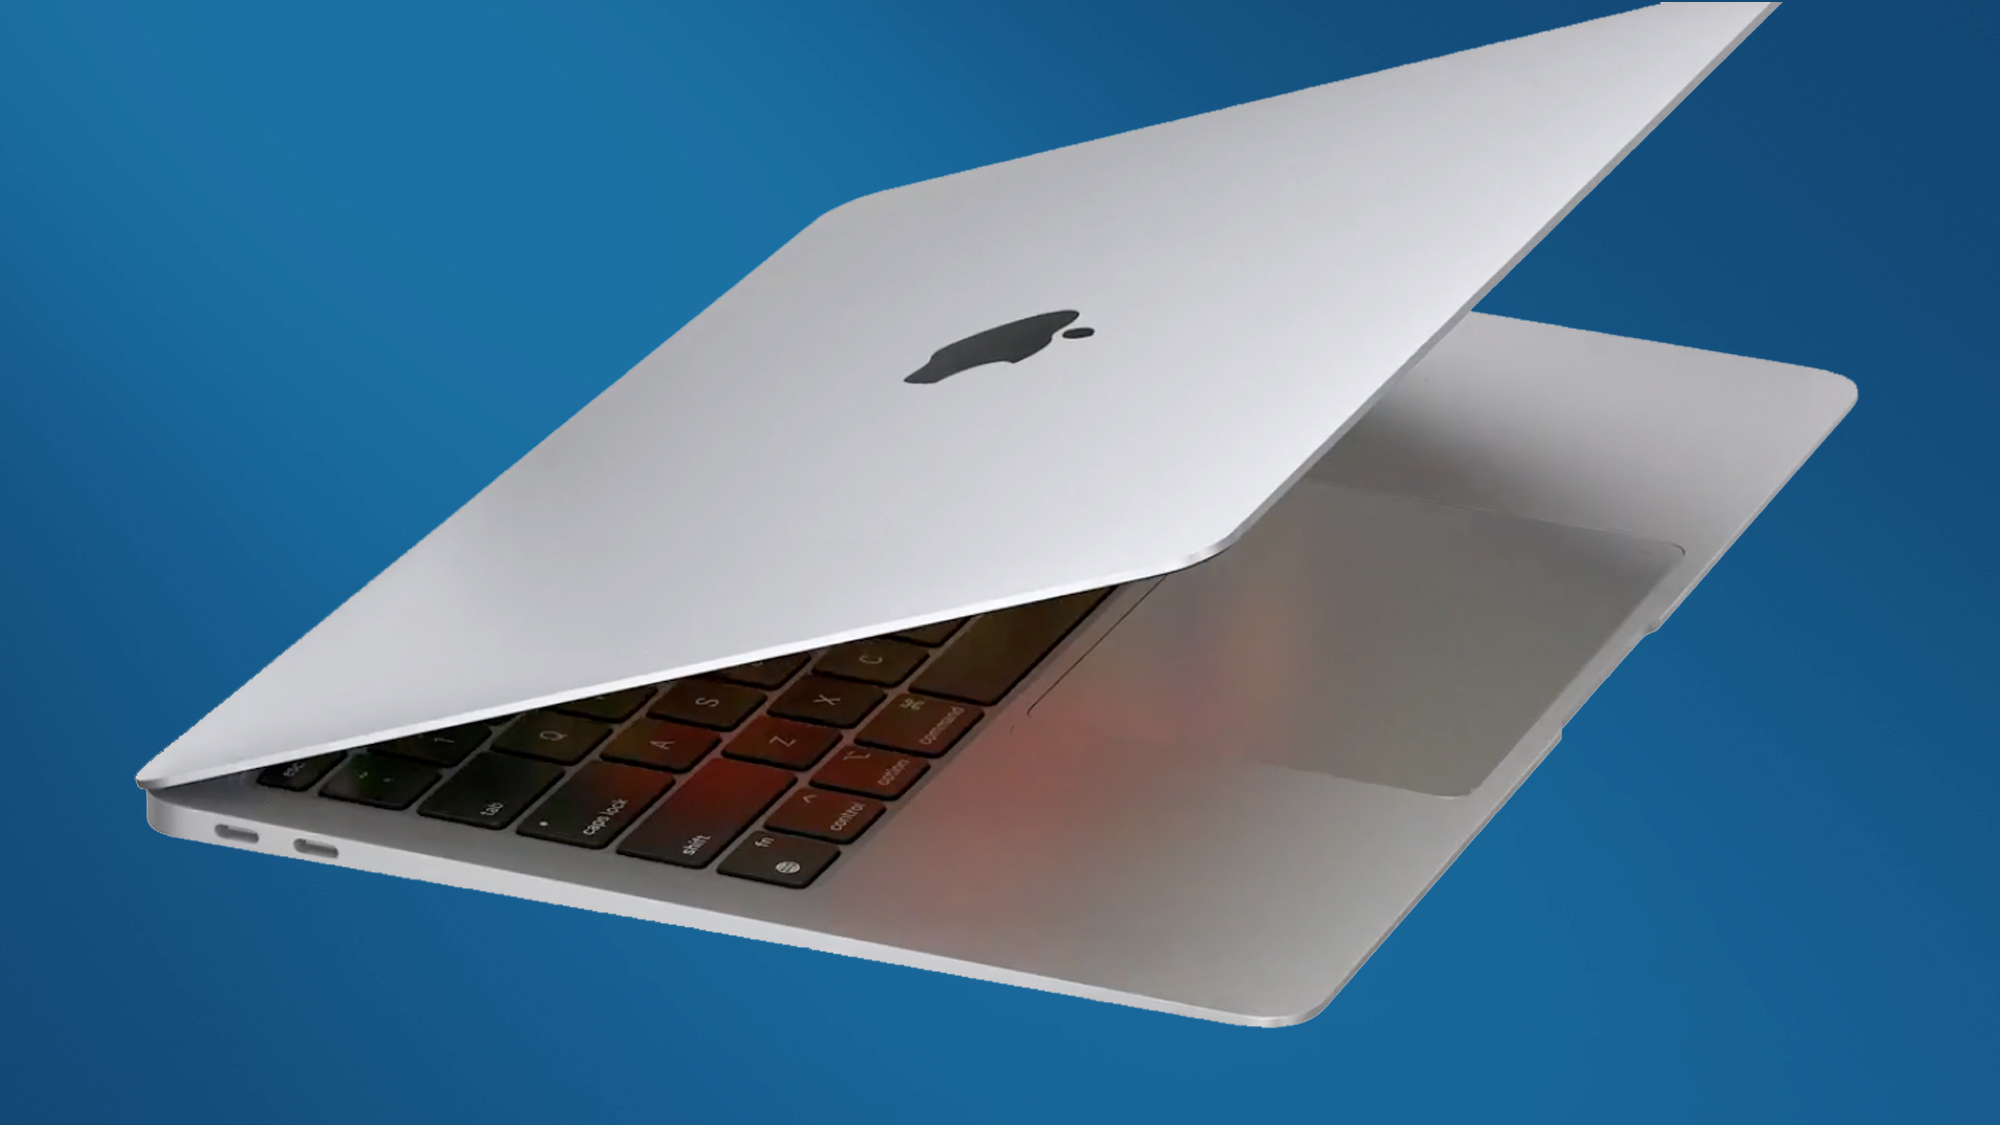 MacBook Air M1 benchmarks revealed — and they destroy Windows laptops